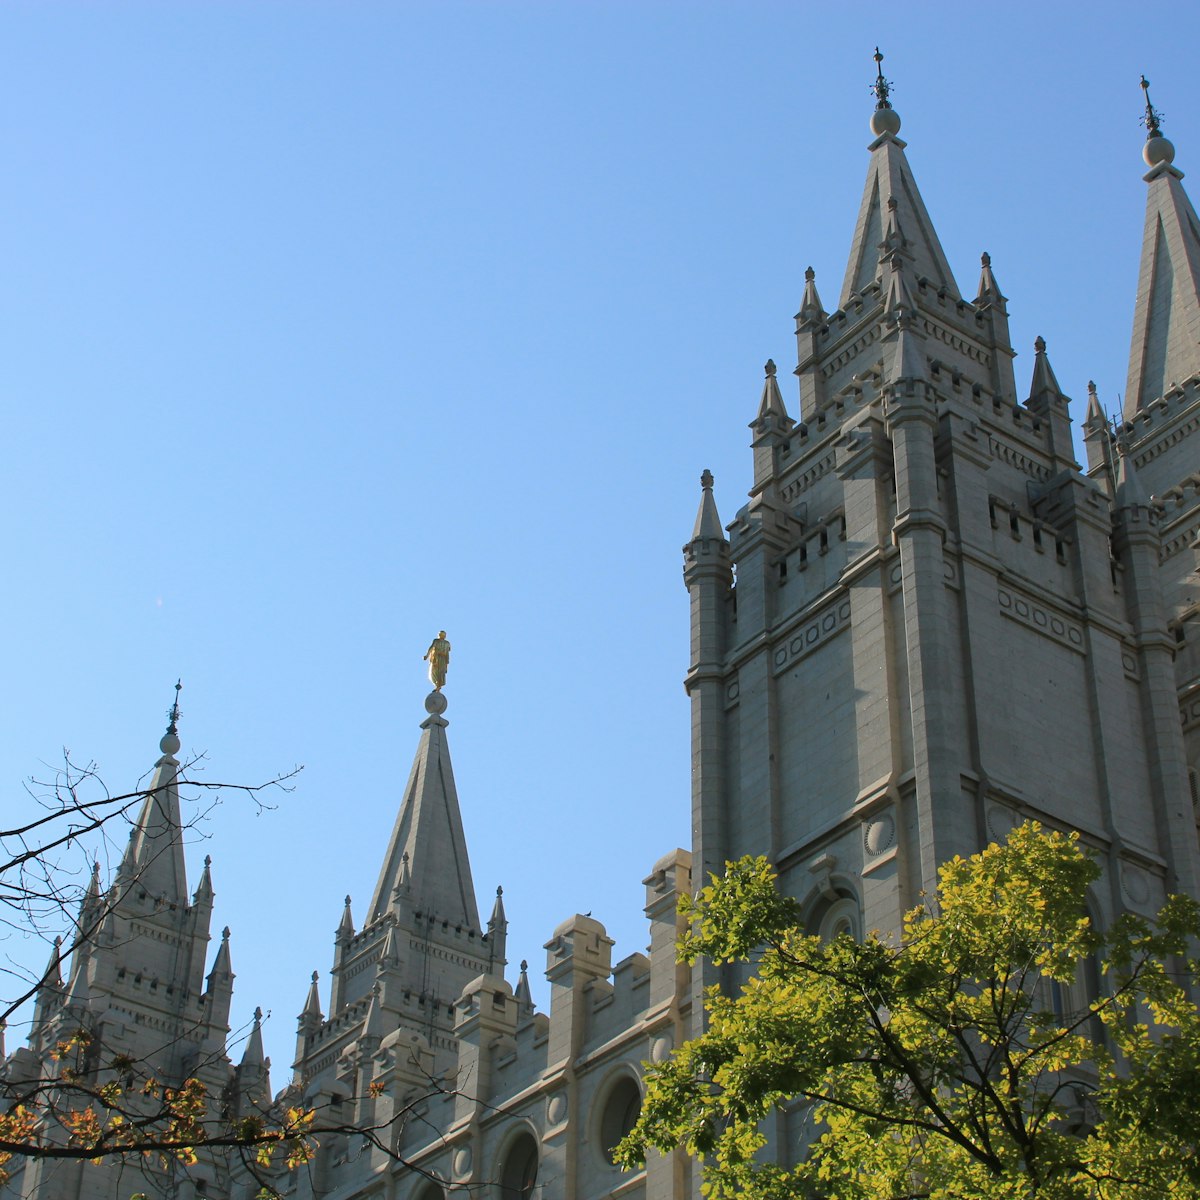 View of the stunning architecture in Salt Lake City, Utah